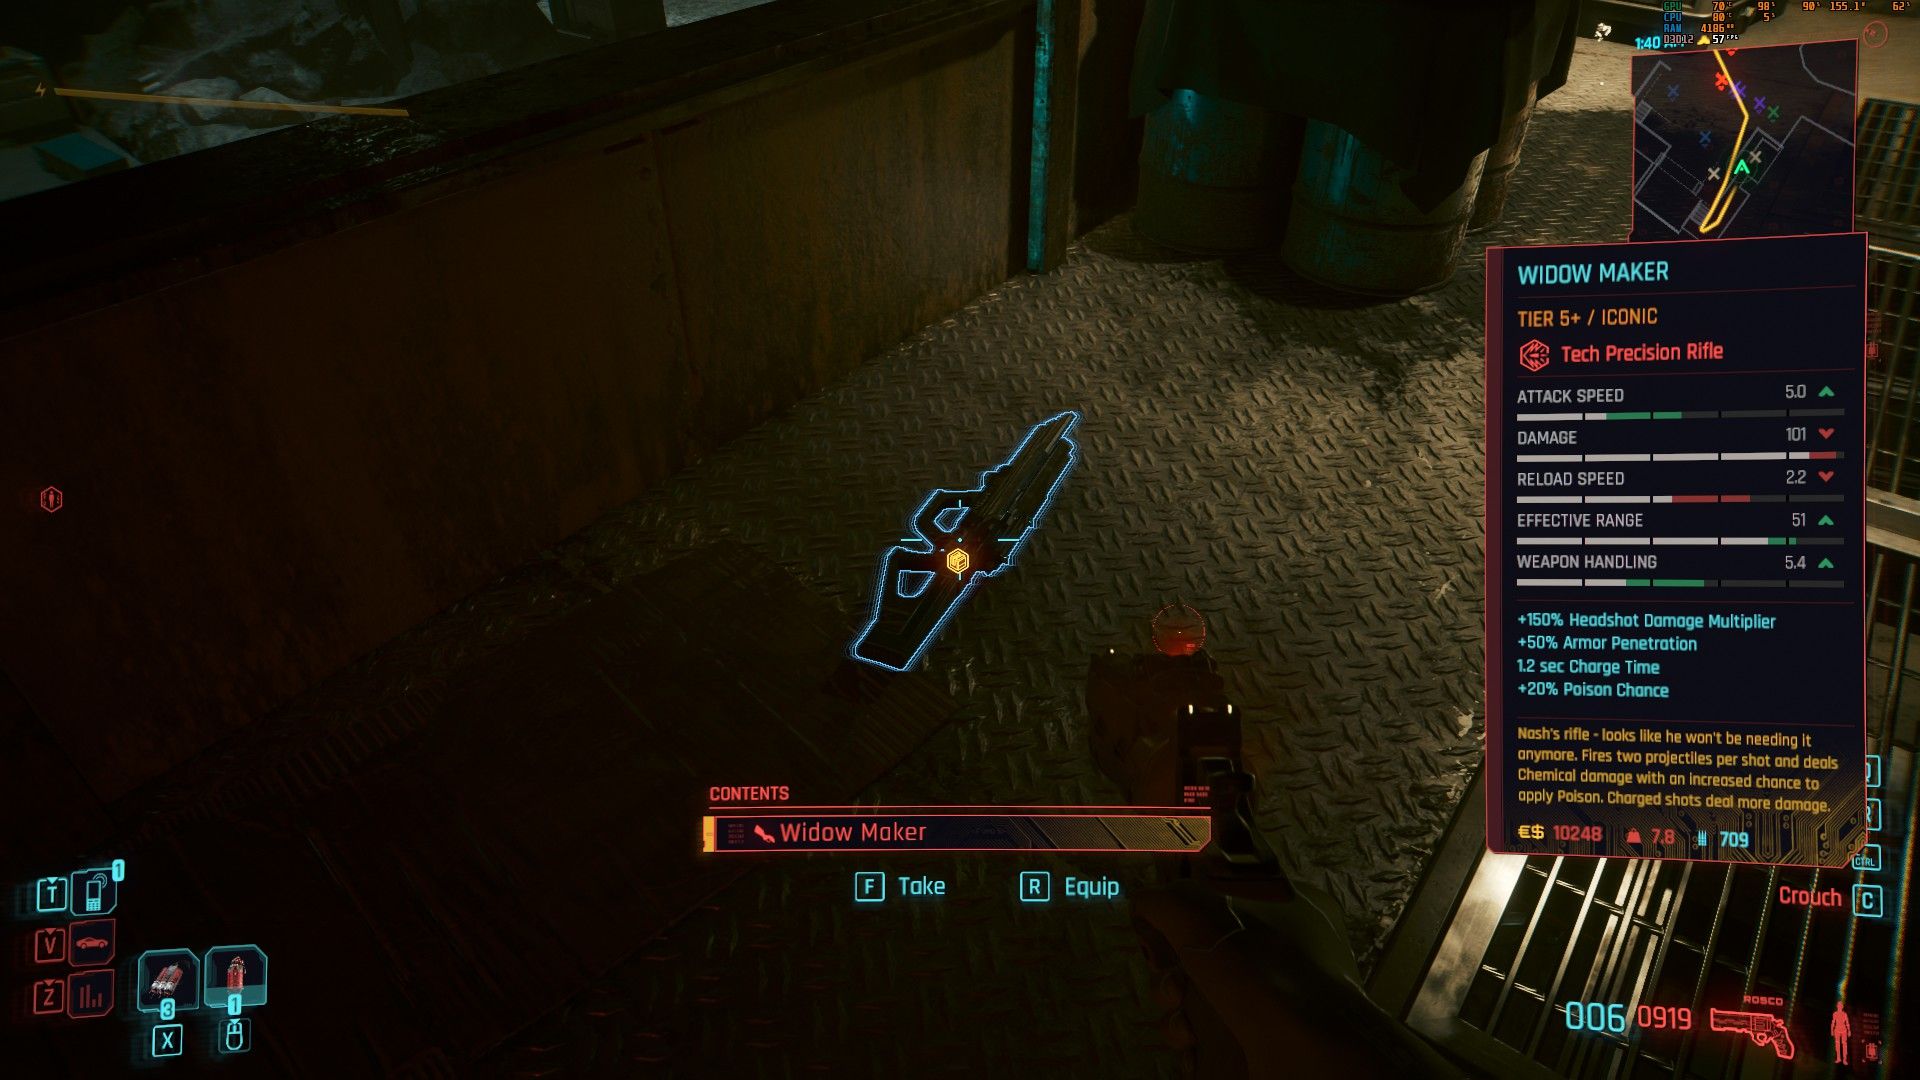 How to Find the Widow Maker in Cyberpunk 2077